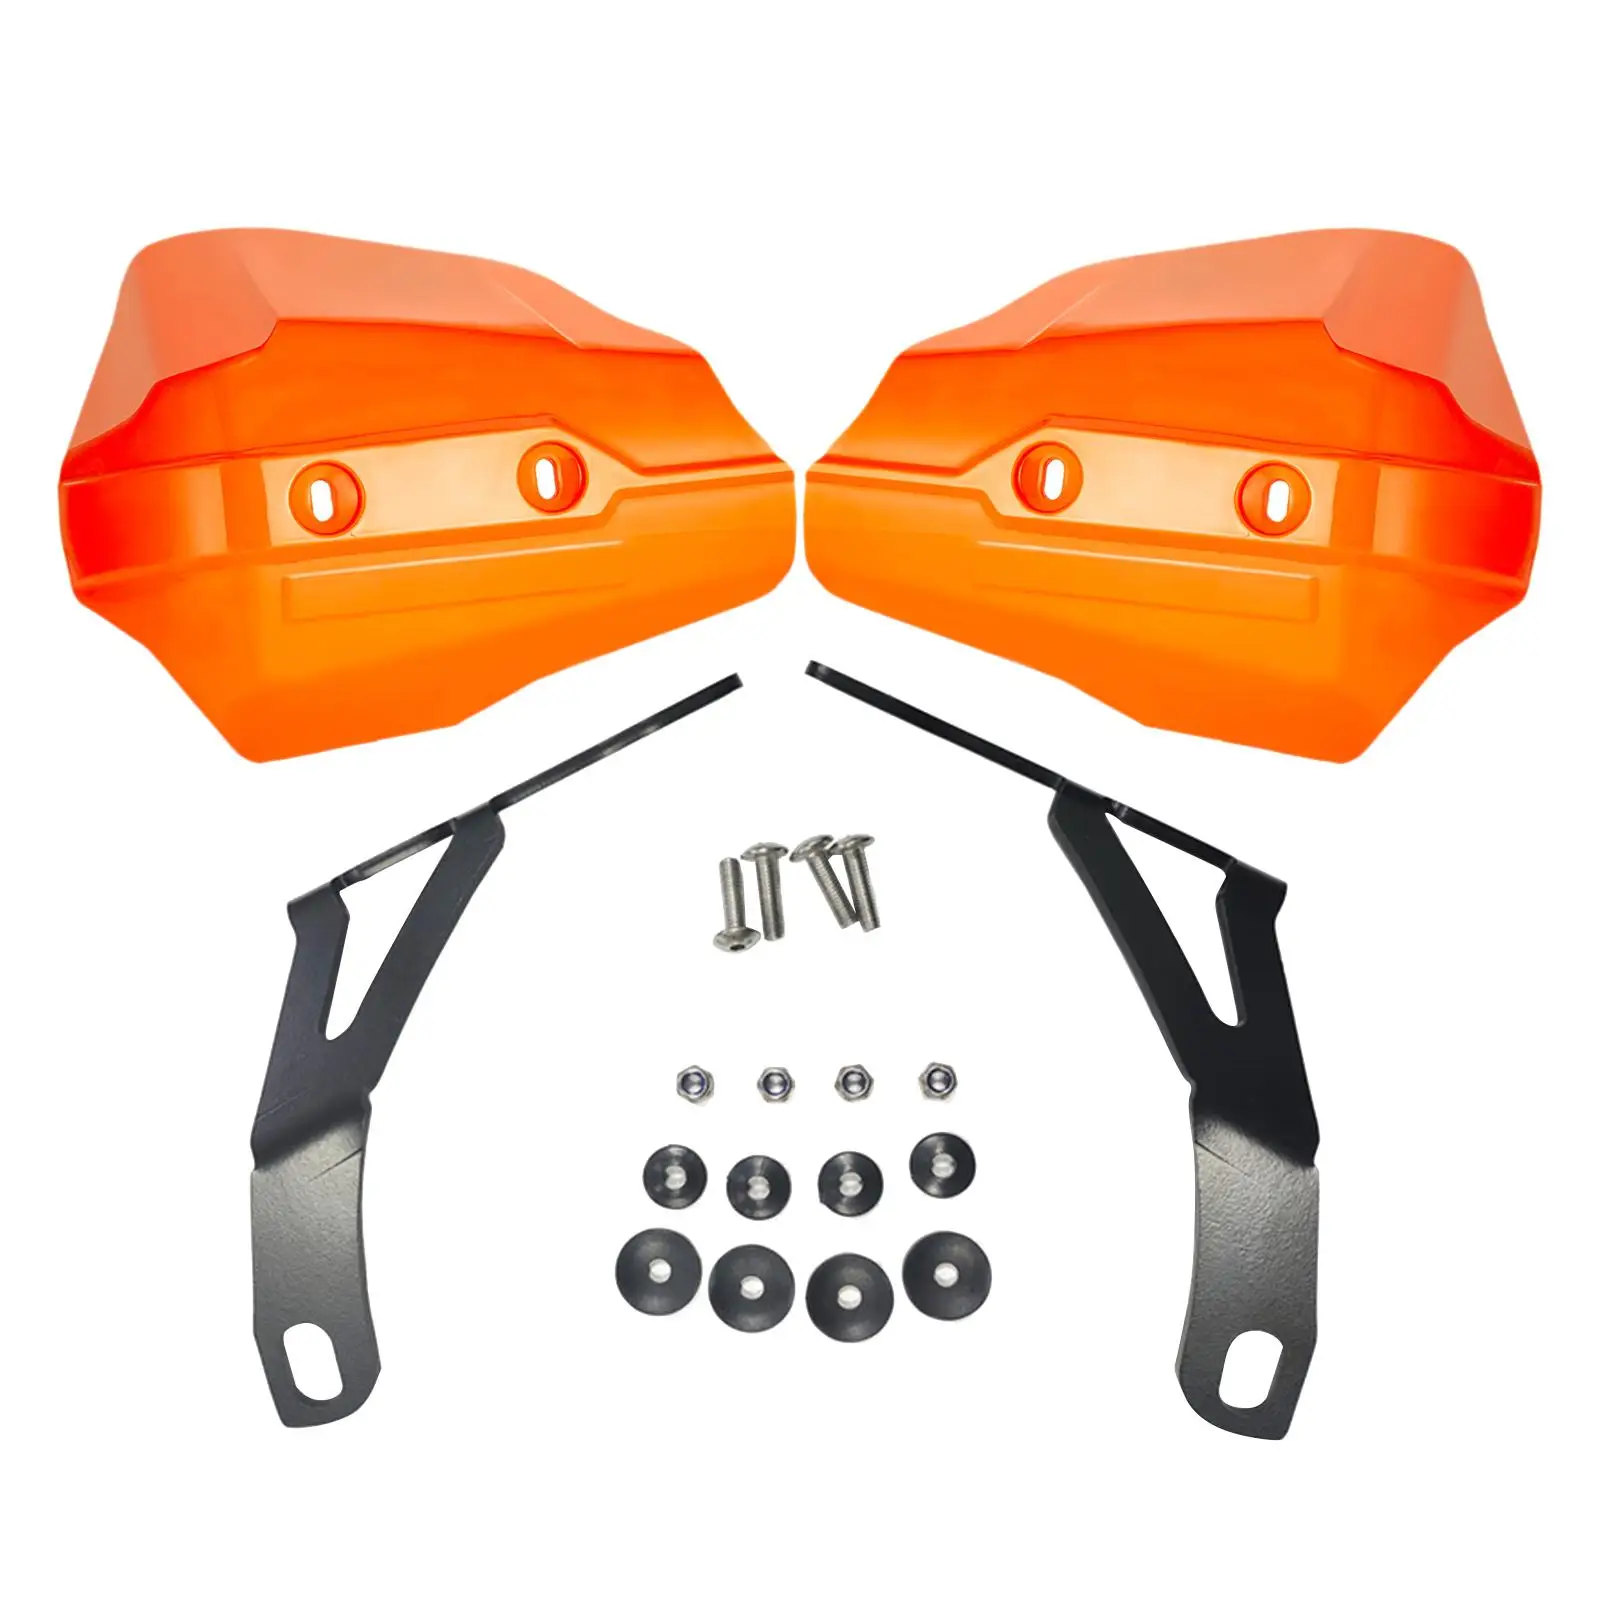 2x Large Motorcycle Handguards Wind Protector, Spare Parts Durable Easy to Install Assembly Motorcycle Handlebar Hand Guards